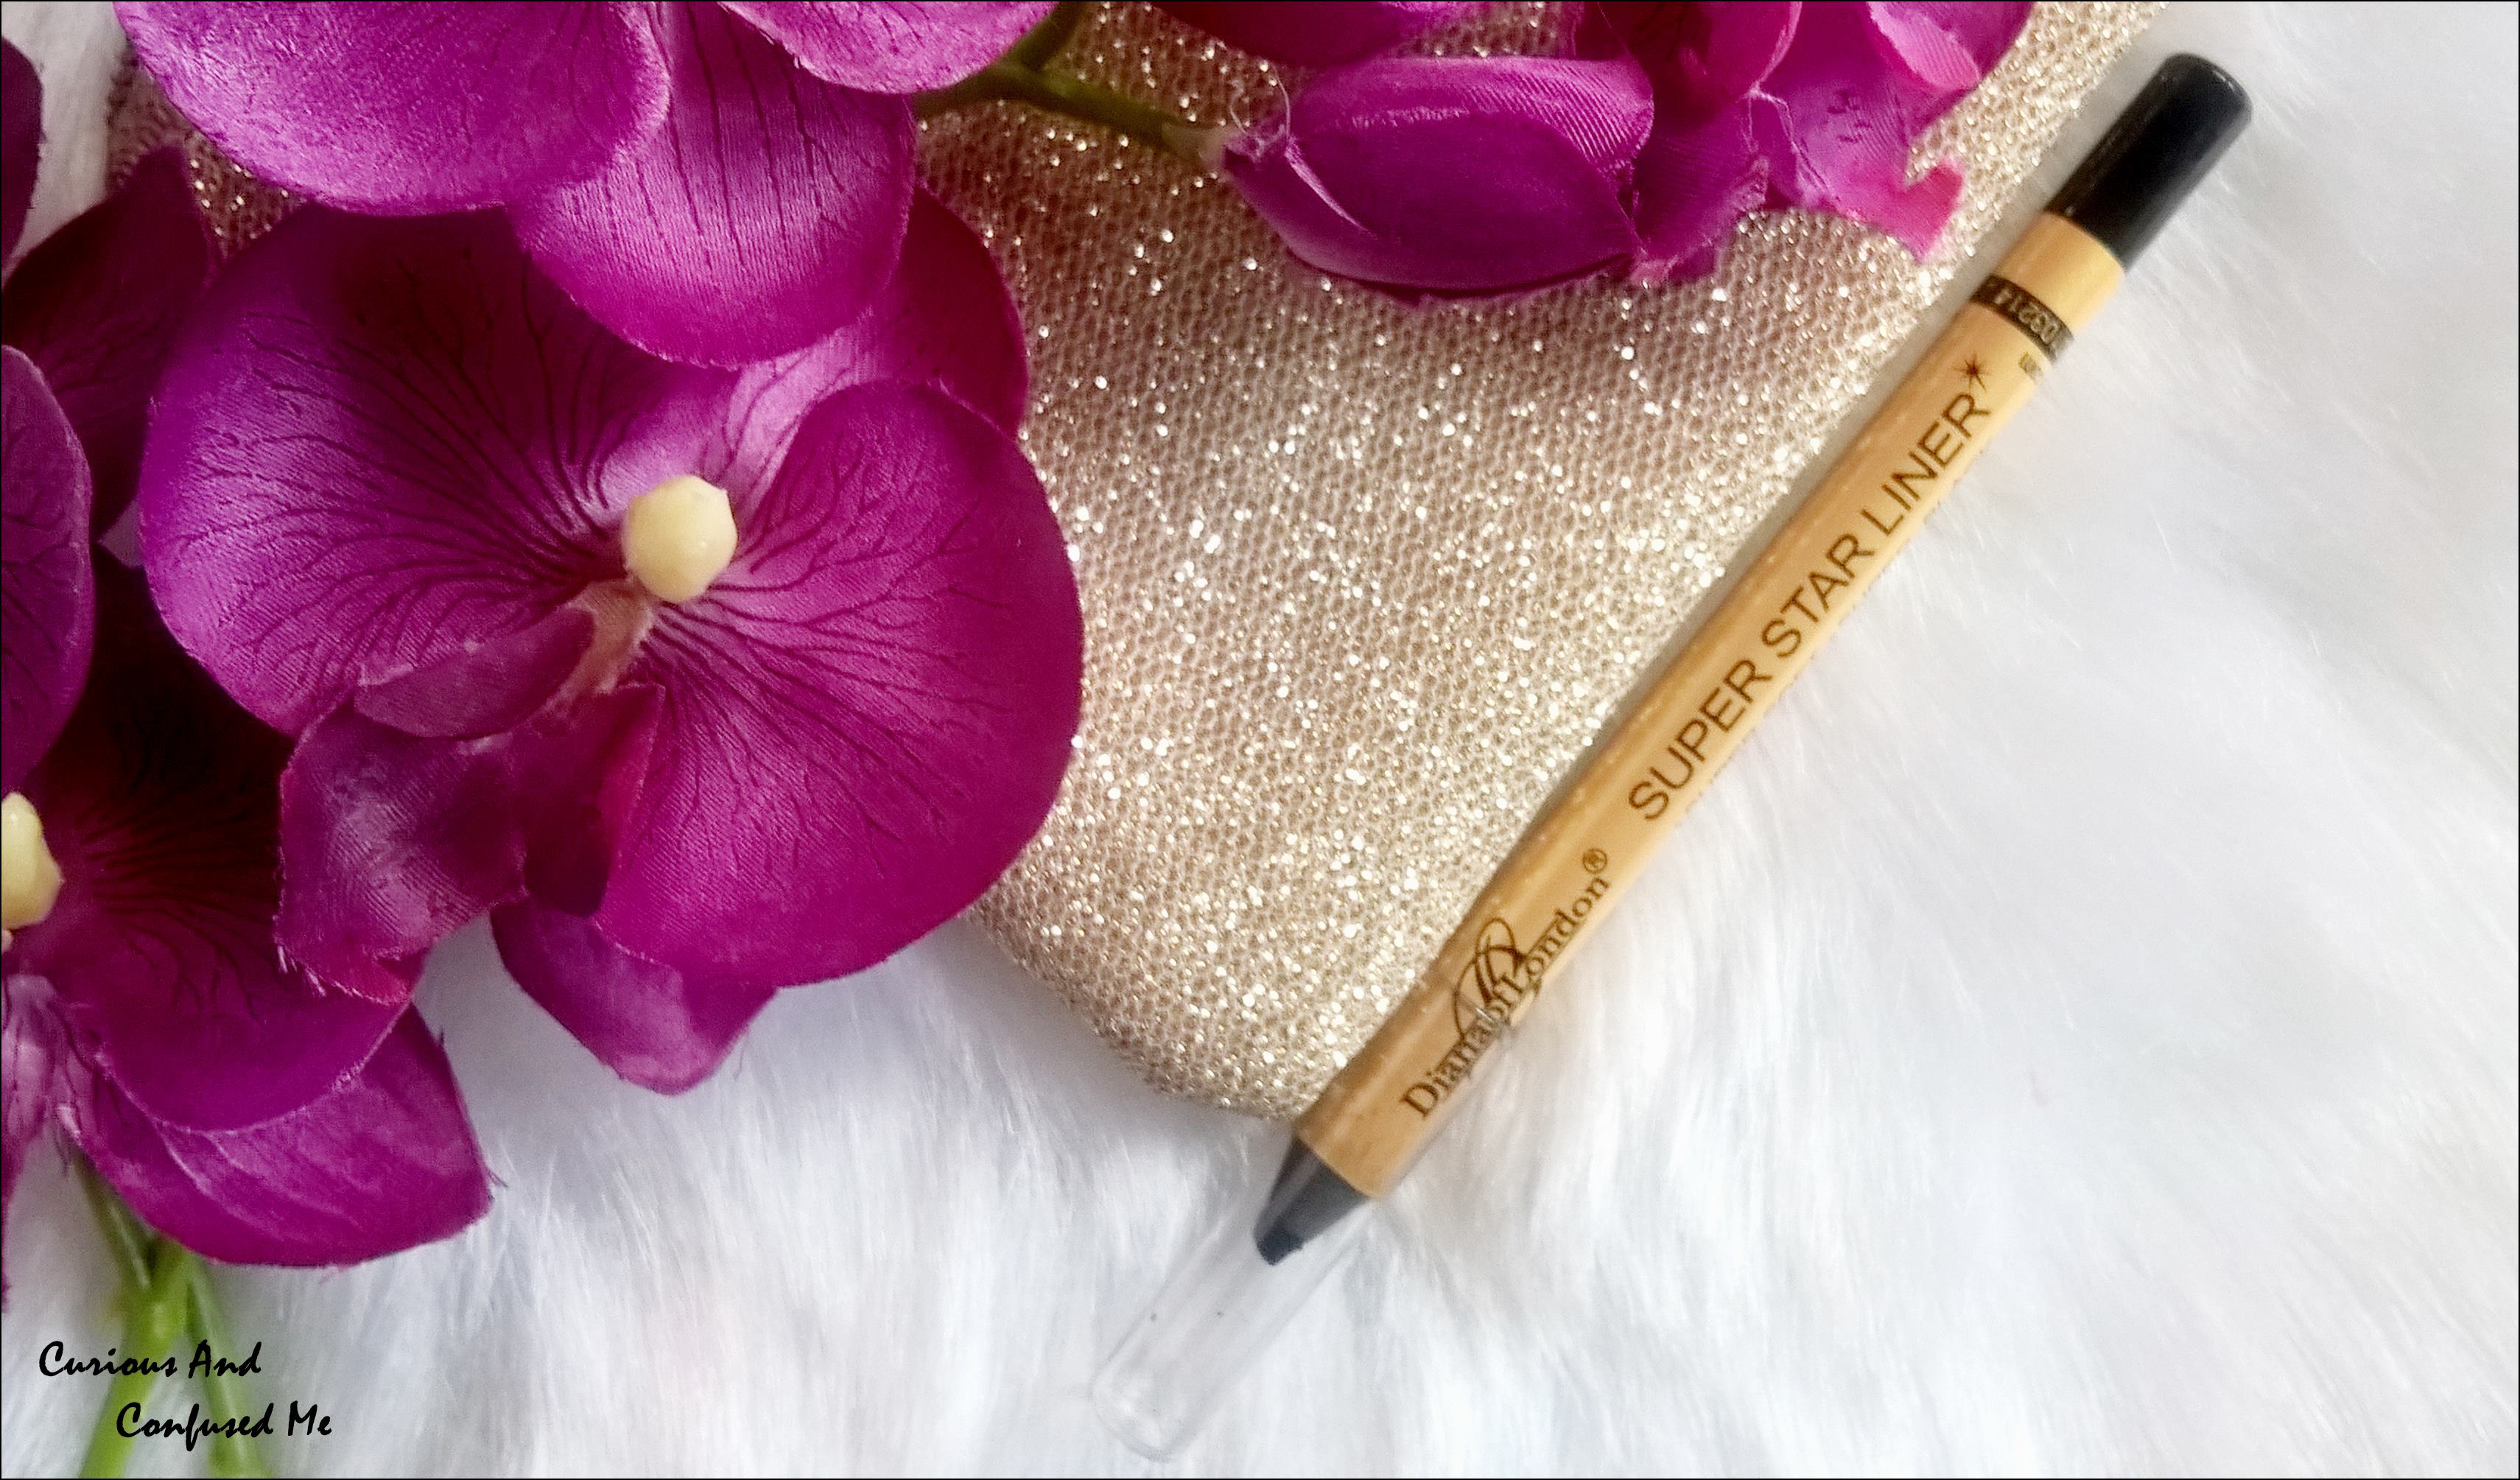 Diana of london super star liner/eye kohl pencil : Review,swatch